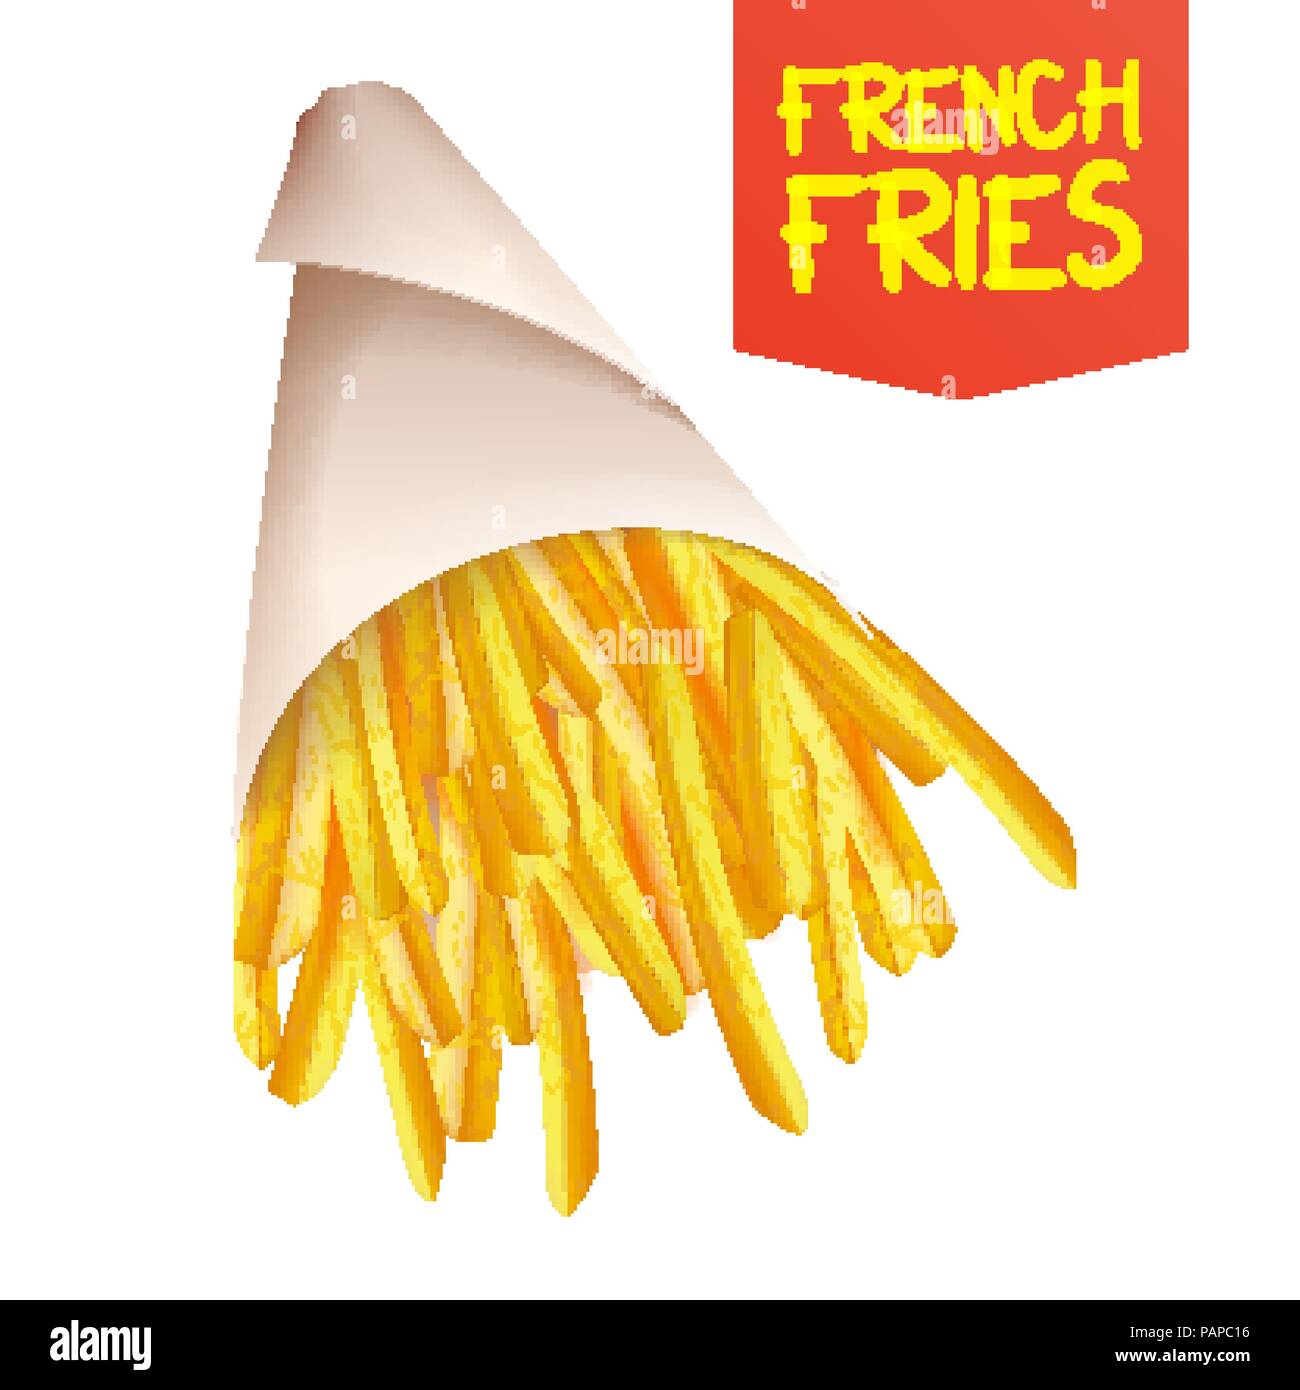 French Fries Potatoes Vector. Fast Food Icons Potato. Full Paper Bag, Cone. Isolated Realistic Illustration Stock Vector